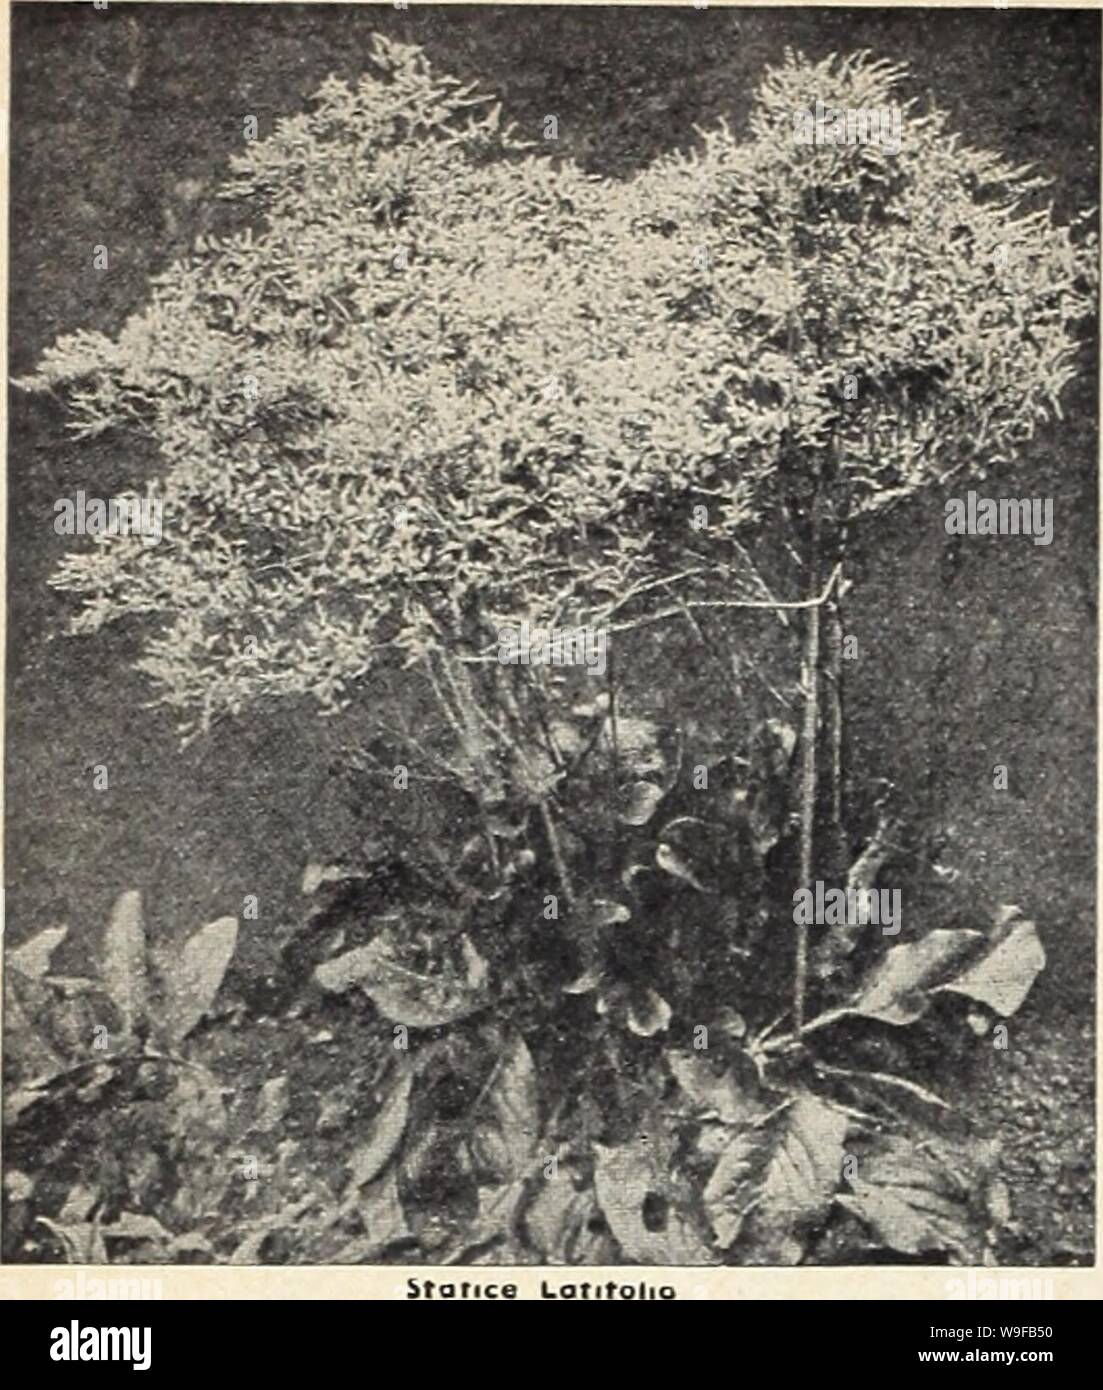 Archive image from page 27 of Currie's garden annual (1942). Currie's garden annual  curriesgardenann19curr 7 Year: 1942 ( SEDUM (Stone Crop) ACRE (Golden Moss) — Dworf creeping variety, flowers bright yellow. Pkt., 25e. ALBUM—Dworf, thick round fo- lioge, flowers bright pink. MIDDENDORFIANA — Folioge dark, flowers yellow. PURNIATUM FOSTERIANUM — Bluish-green leaves, of trailing habit, flowers golden yellow. SEXANGULAR—Very dark green foliage, flowers yellow. SIEBOLDI—Round foliage, bright pink flowers. SPURIUM COCCINEUM—Beauti- ful rosy crimson; 6'. Pkt., 20e. STOLONIFERA — Flat leaves; flowe Stock Photo